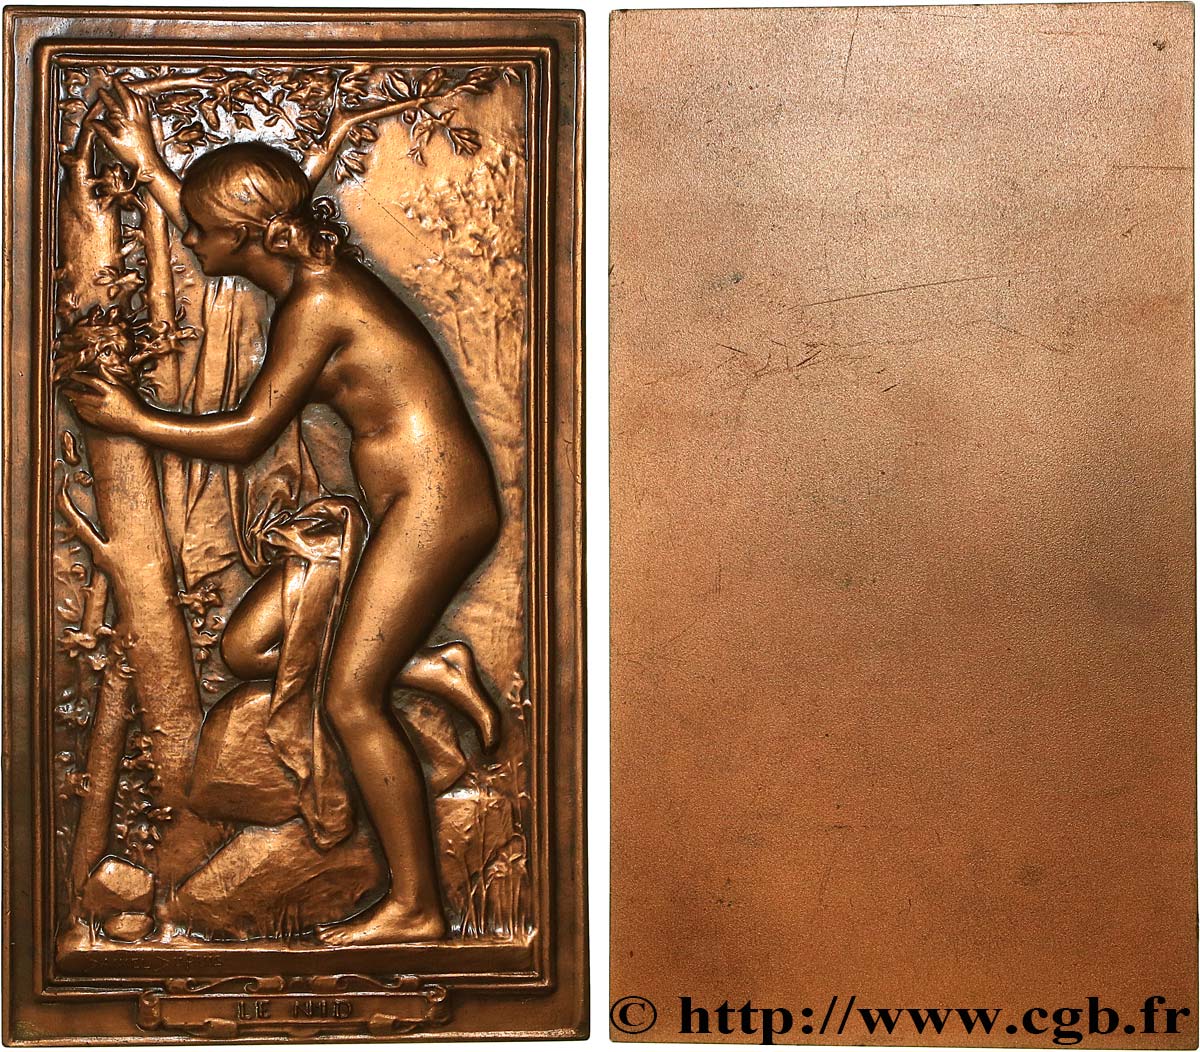 ART, PAINTING AND SCULPTURE Plaque, Le nid, refrappe MBC+